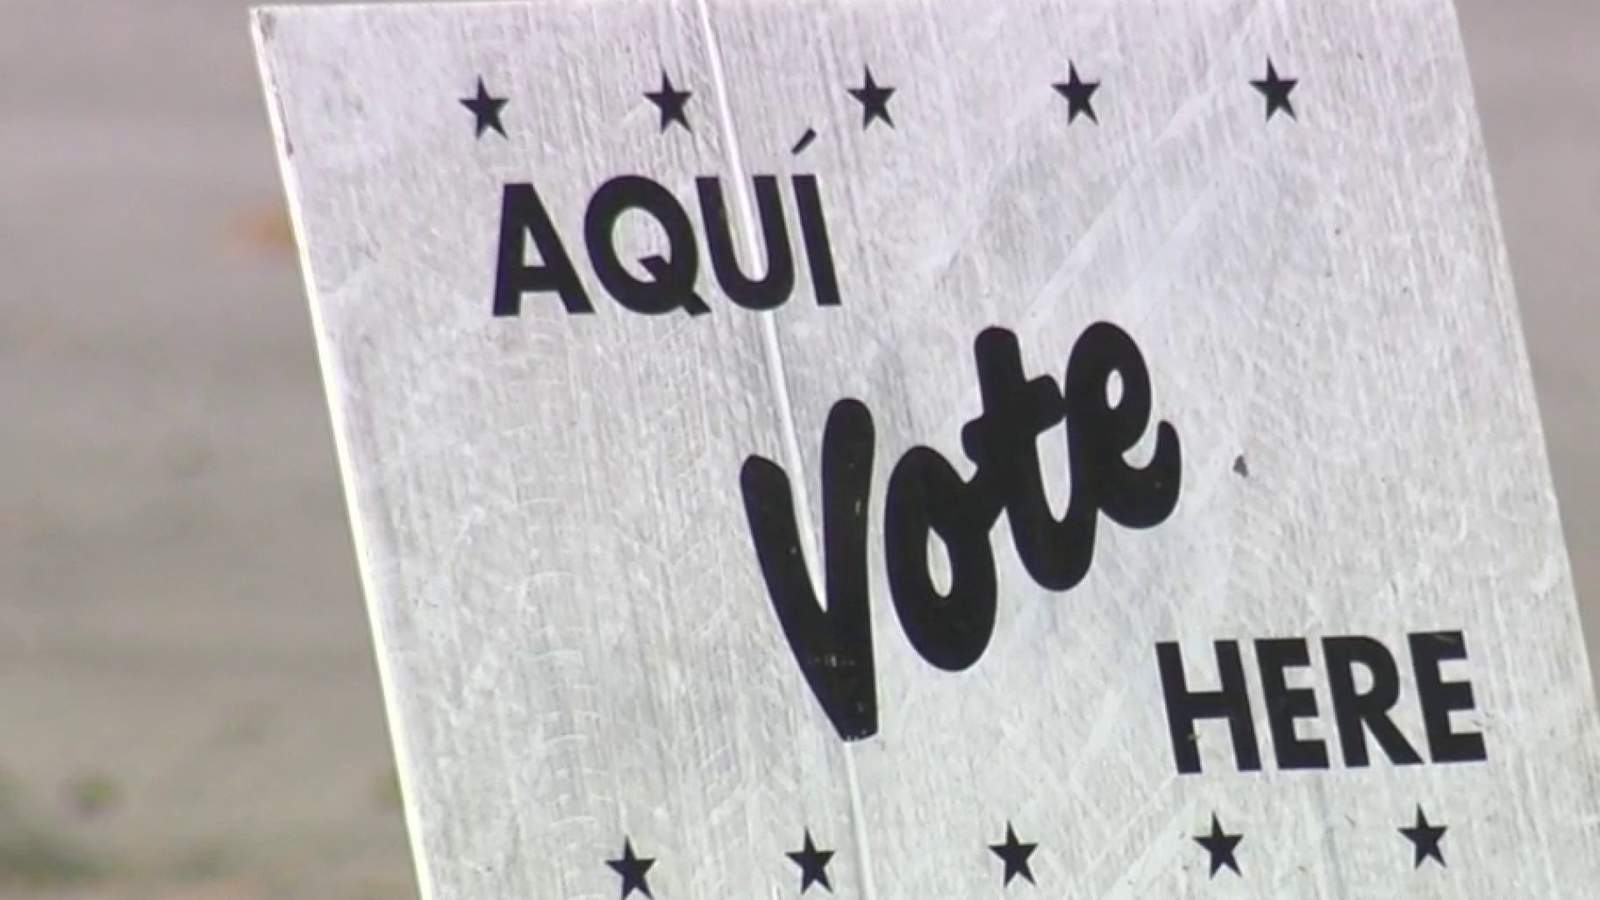 Bexar county commissioner proposes 24/7 early voting locations, mega voting sites